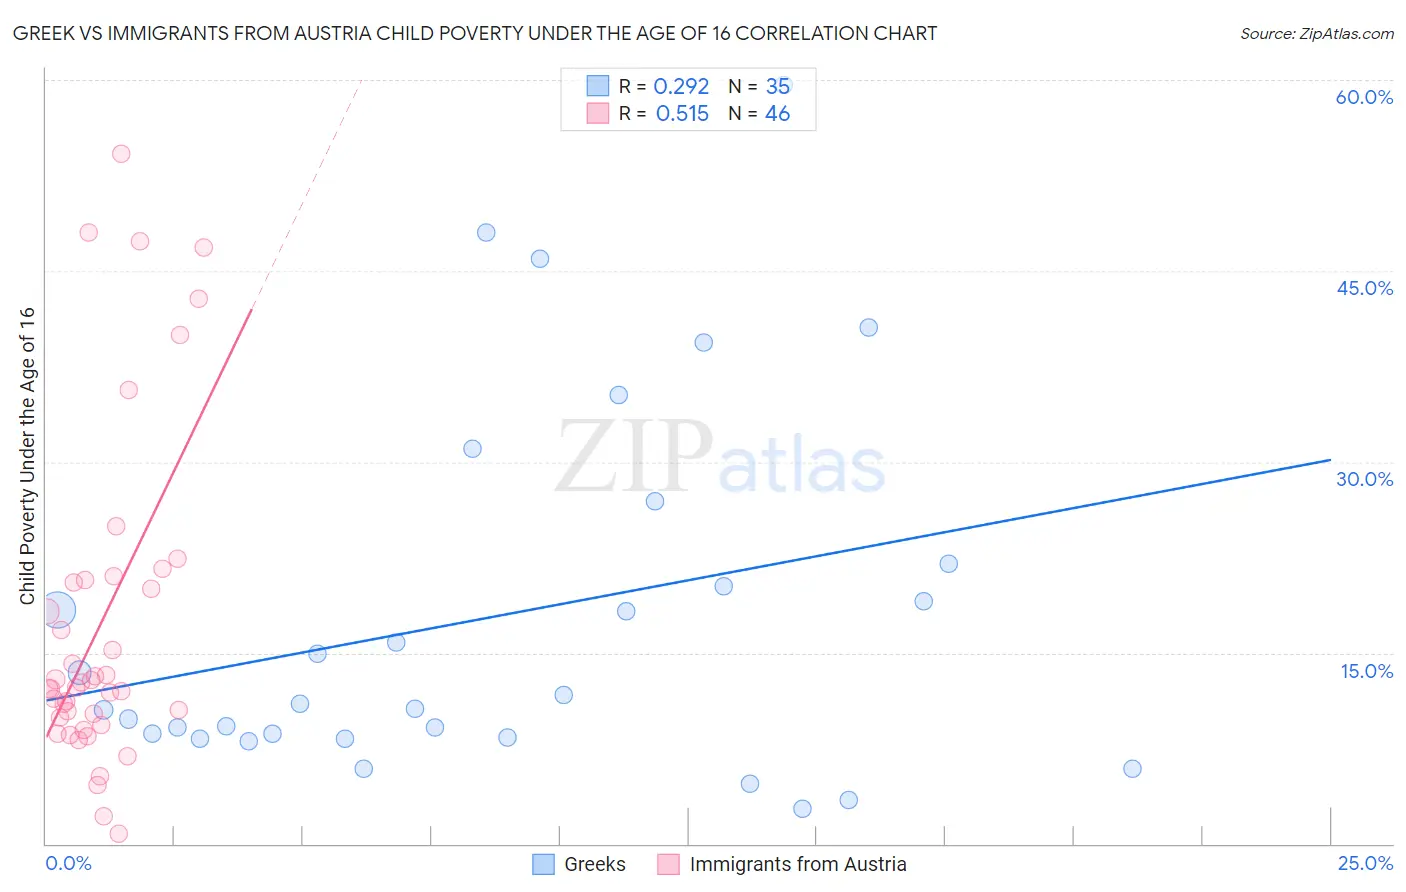 Greek vs Immigrants from Austria Child Poverty Under the Age of 16